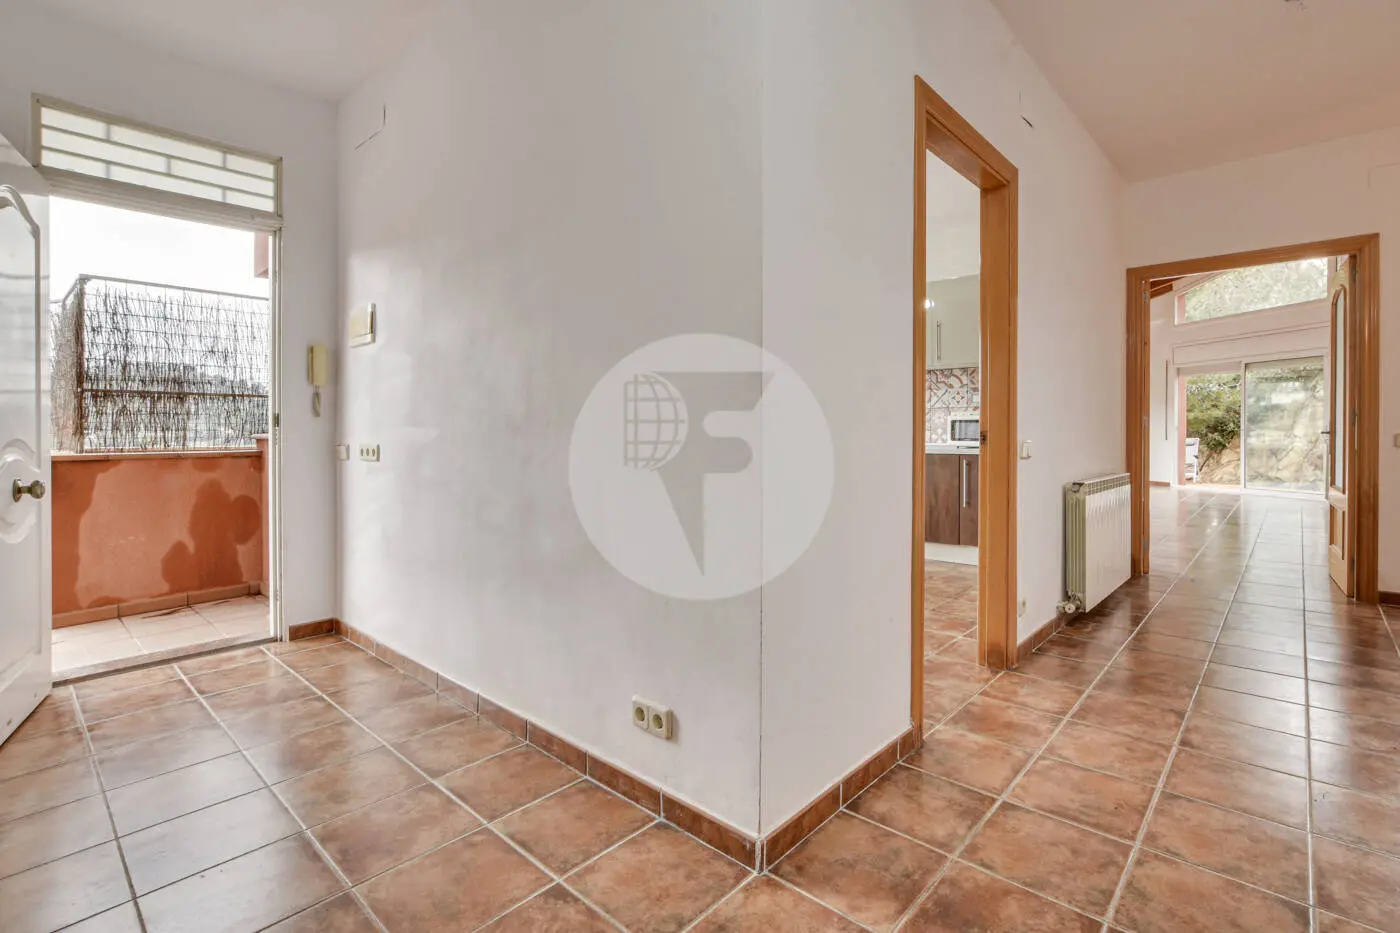 Charming detached house in Mas Llombart Nord 19